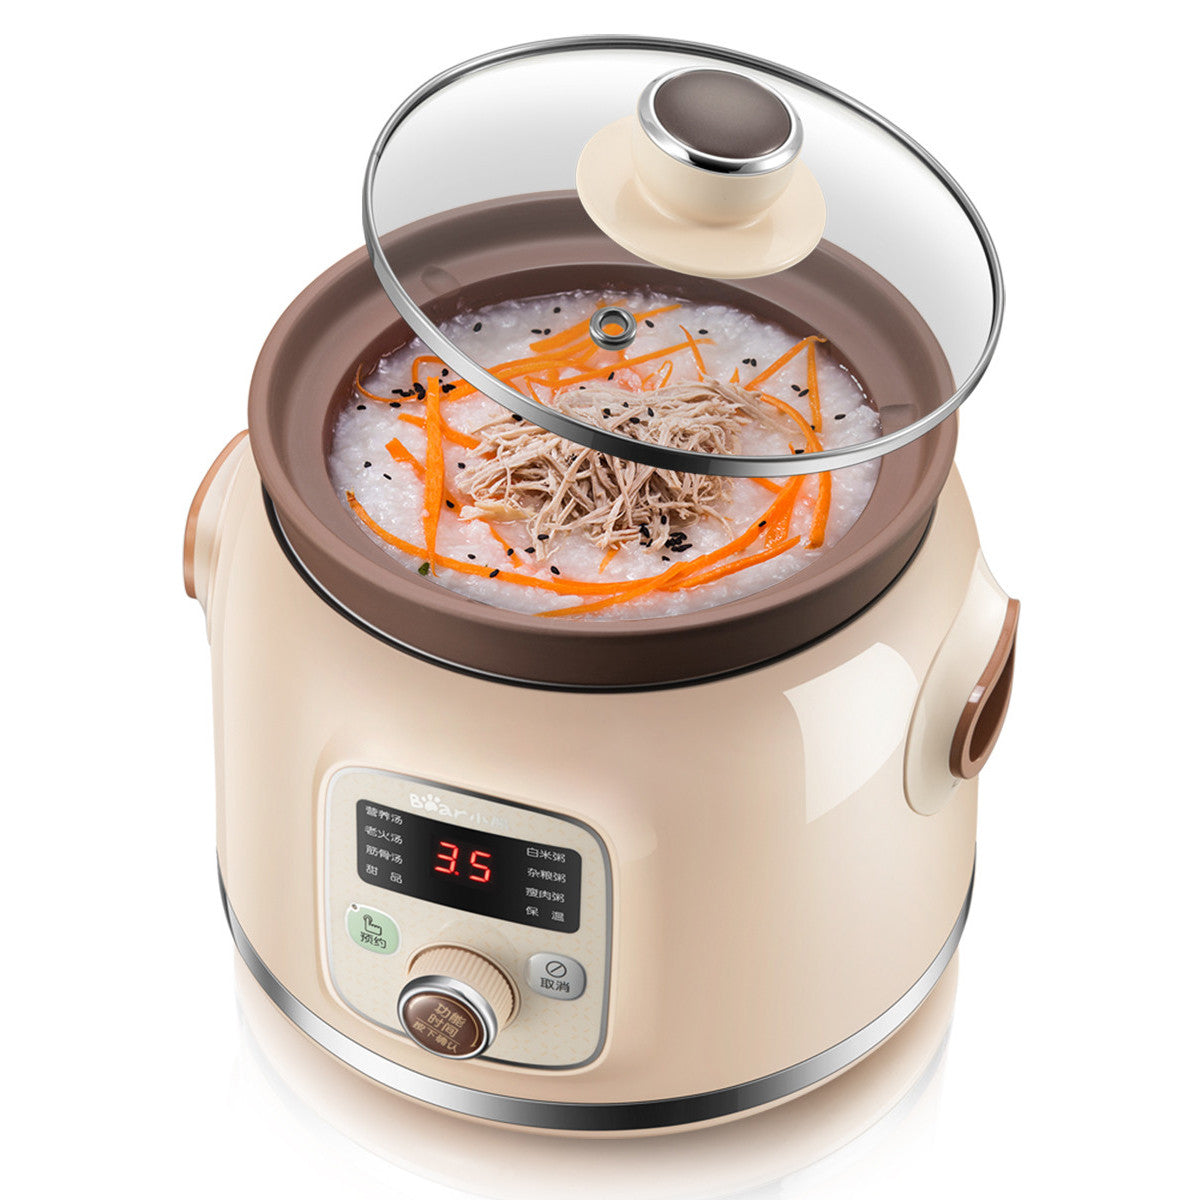 Bear DDG-D20N1 2L Purple Sand/D20M1 White Sand/ Electric Slow Cooker/ Glass Cover/ SG Plug/ Up to 1 Year SG Warranty